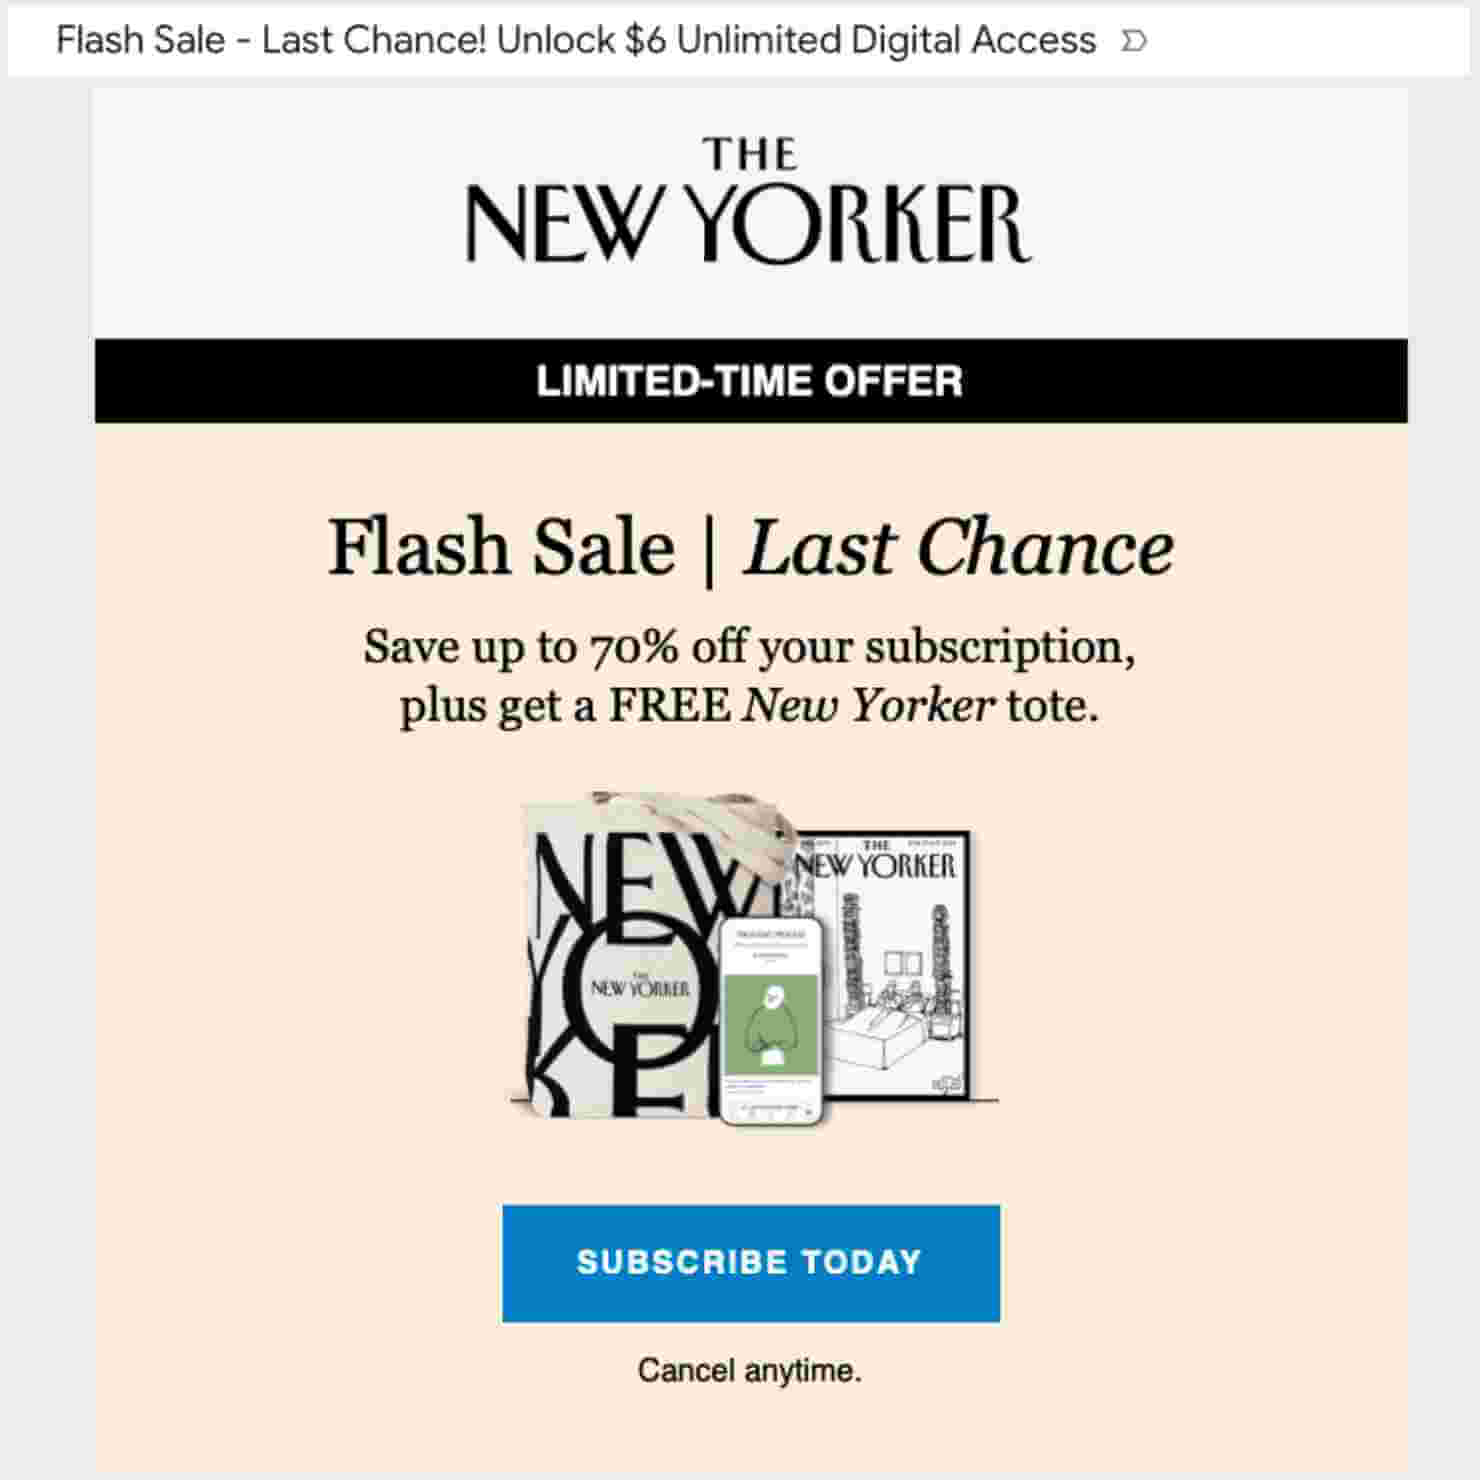 New Yorker flash sale example. Email subject line says "Flash Sale - Last Chance! Unlock $6 Unlimited Digital Access." Email content includes "Save up to 70% off your subscription, plus get a FREE New Yorker tote."